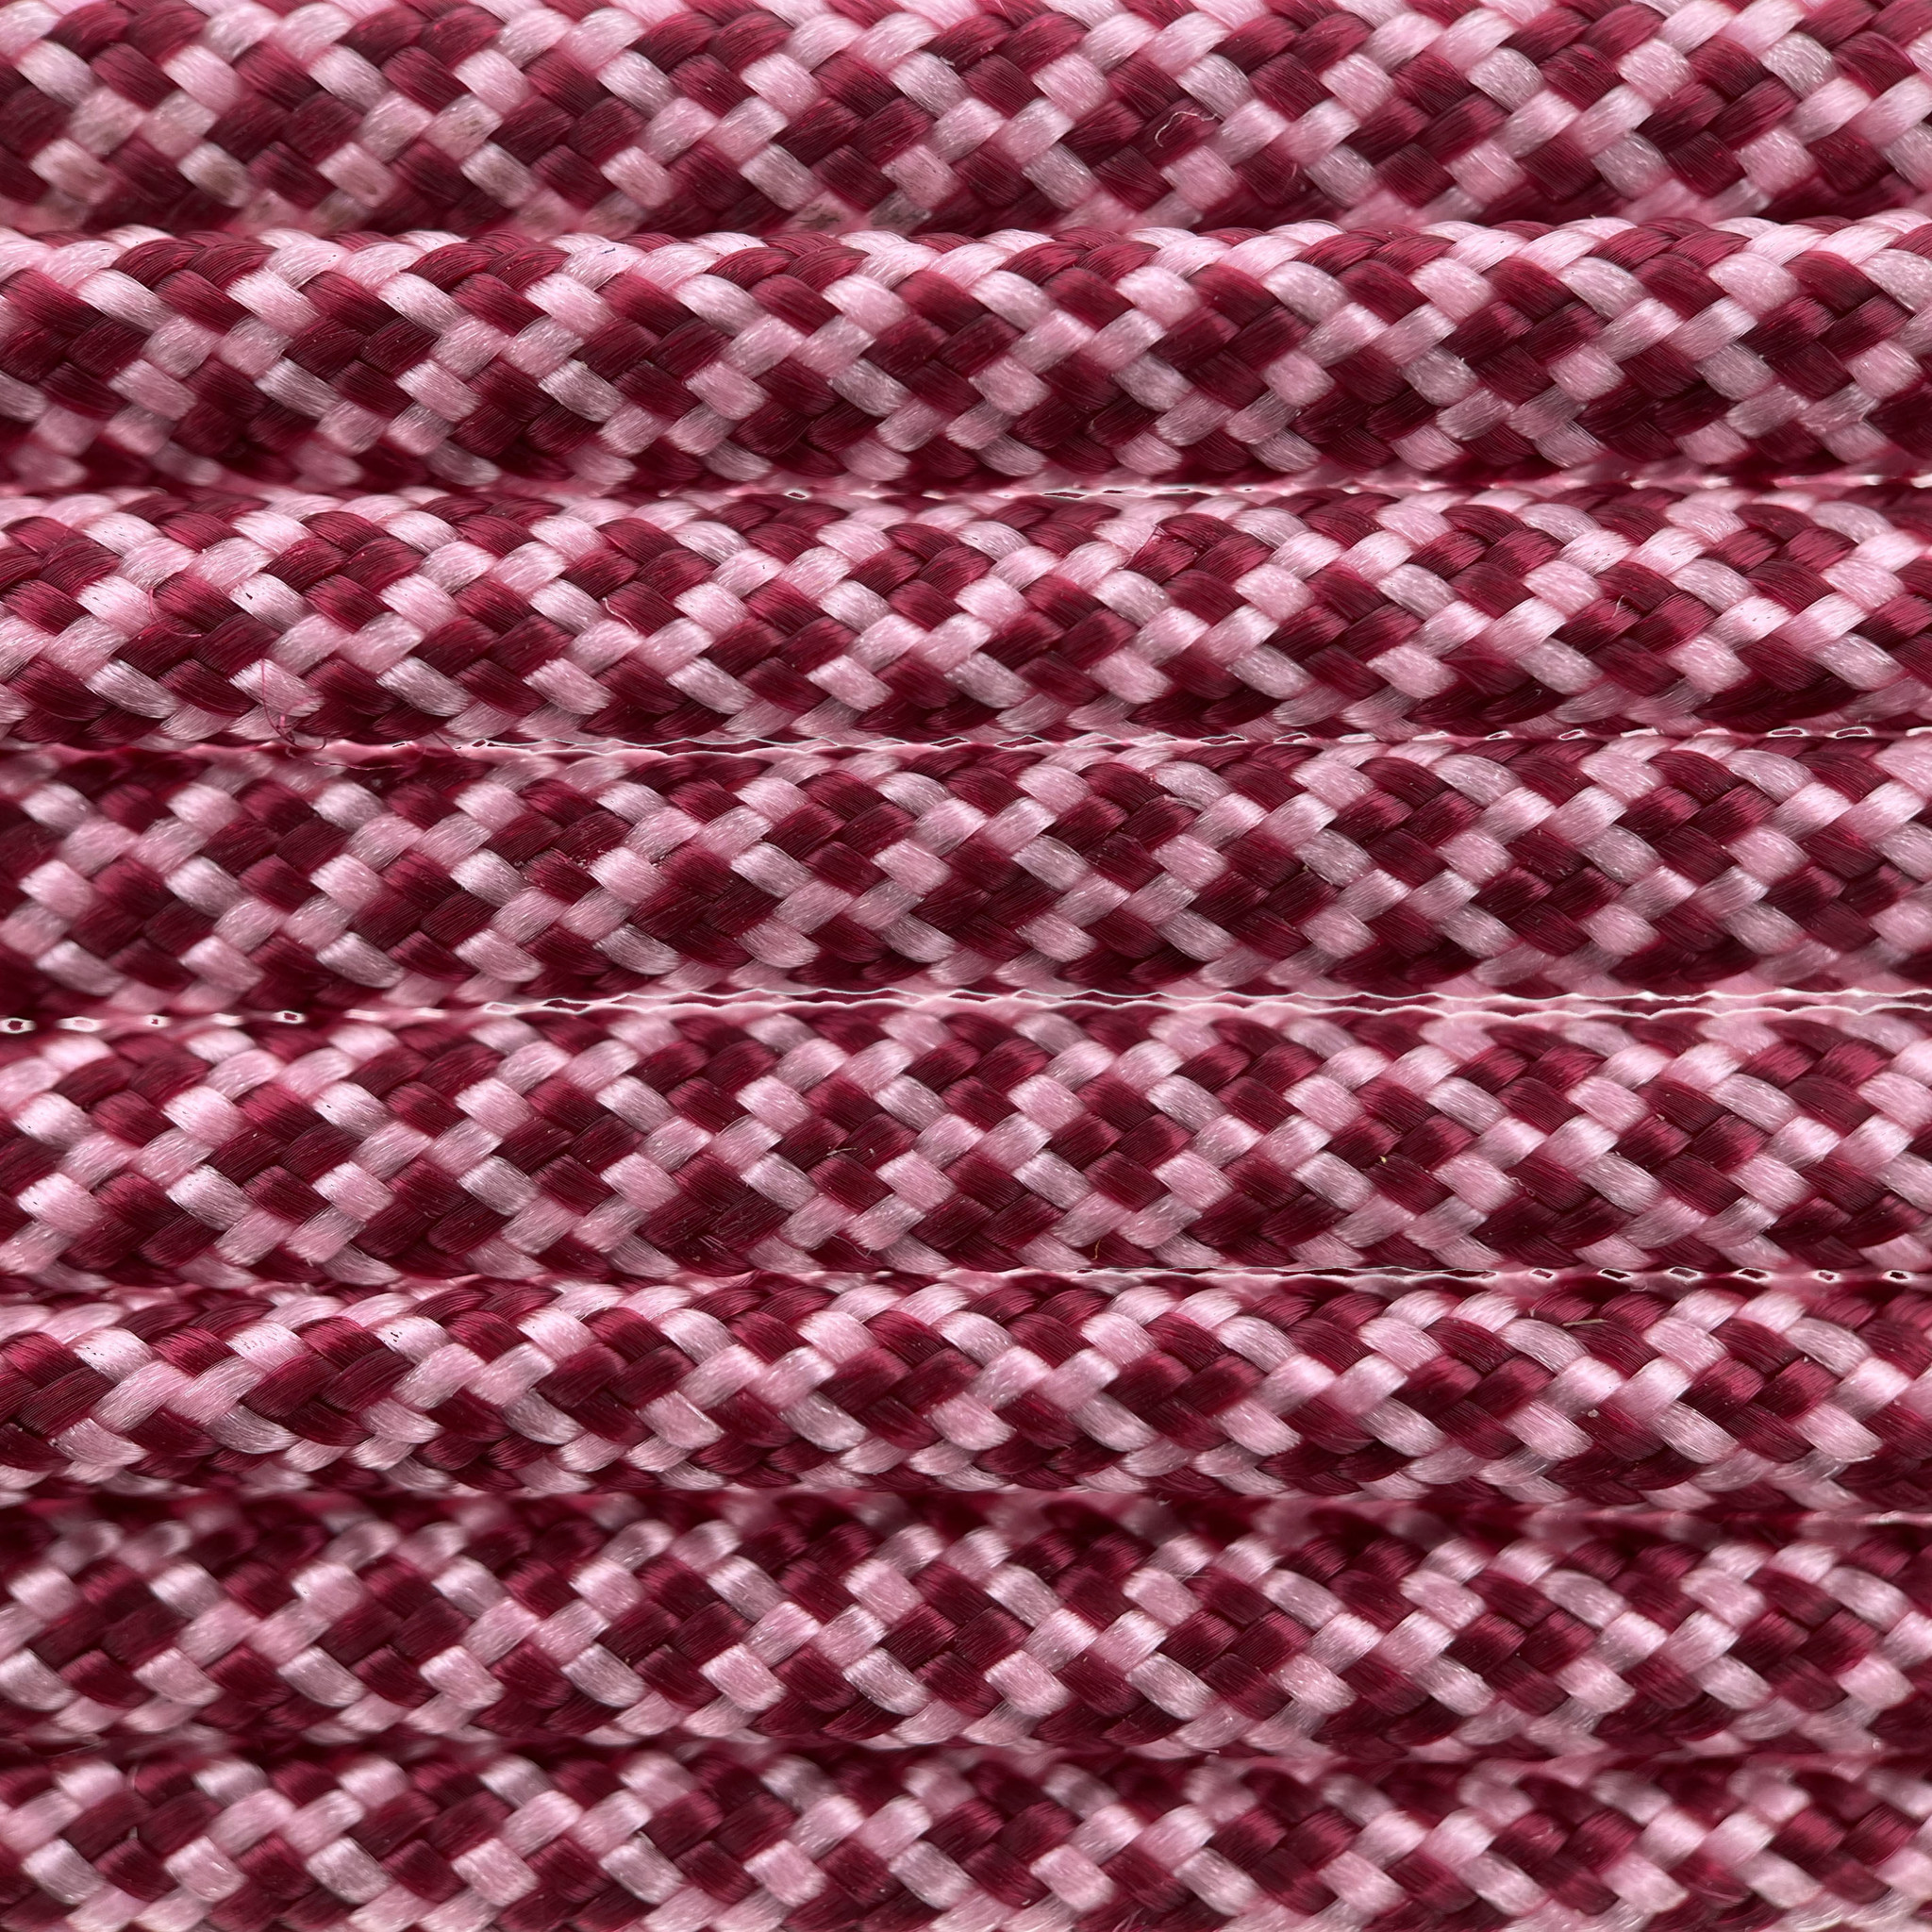 Buy Paracord 550 type III Rose Pink / Burgundy Diamond from the expert -  123Paracord